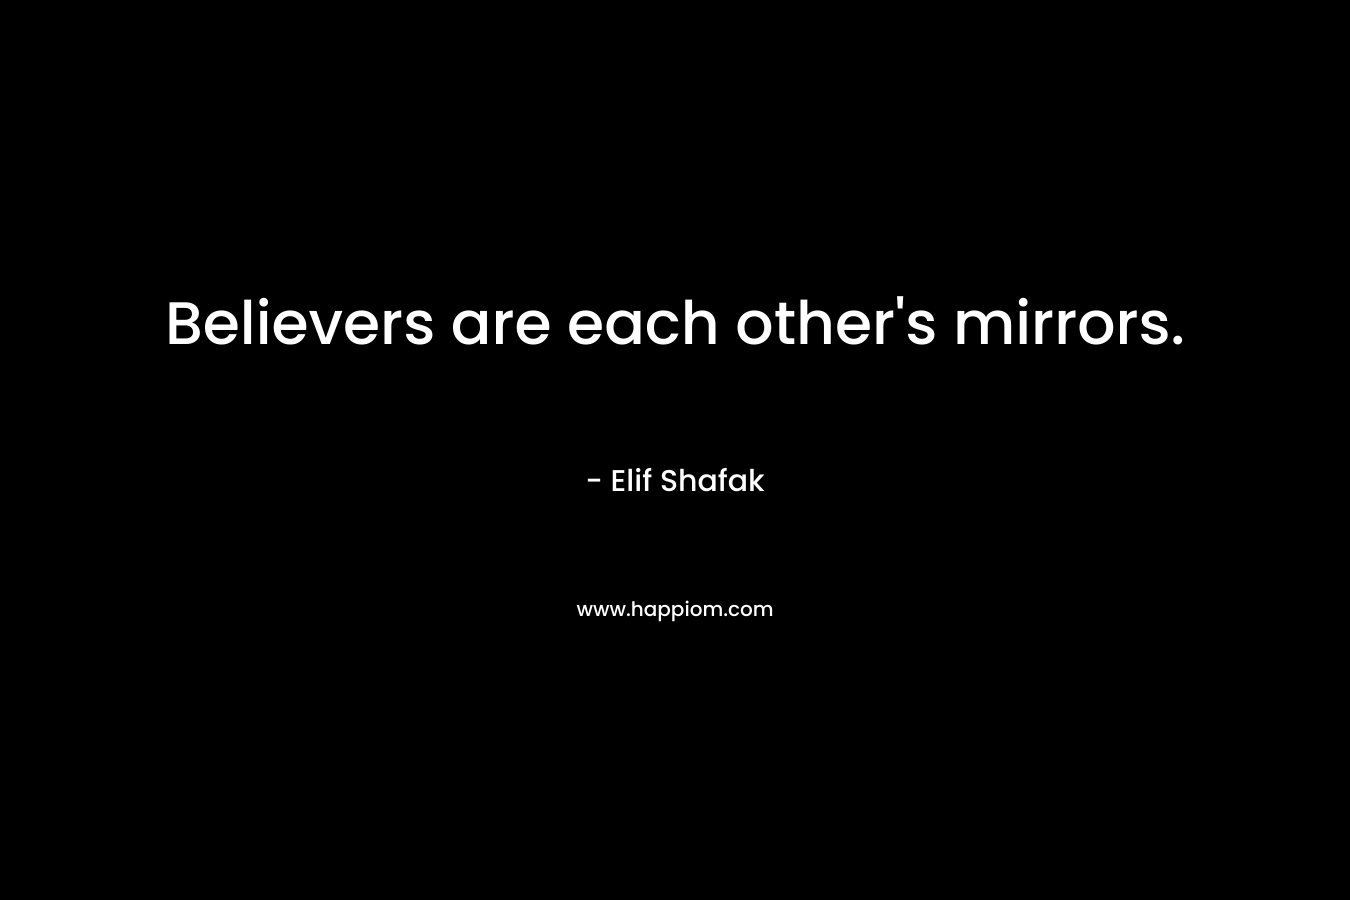 Believers are each other's mirrors.